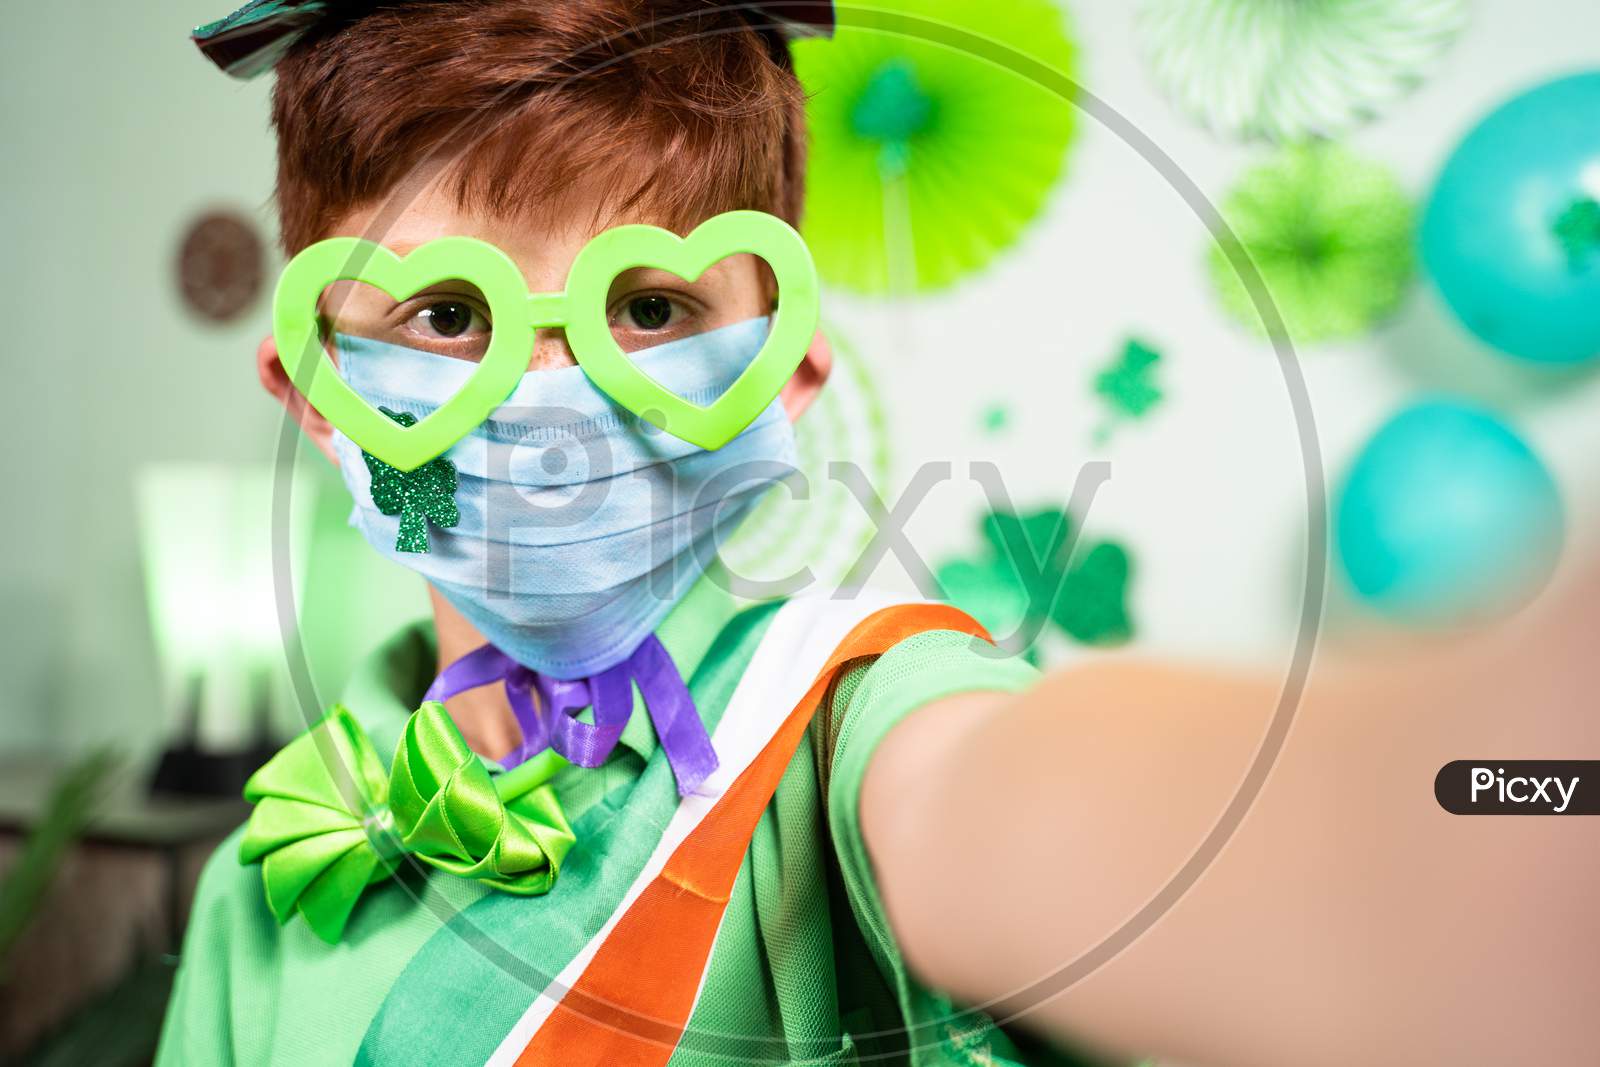 Selective Focus On Mask, Young Kid With Medical Face Mask Taking Selfie During Saint Patricks Day Celebration At Home On Decorated Background During Coronavirus Covid-19 Pandemic At Home.